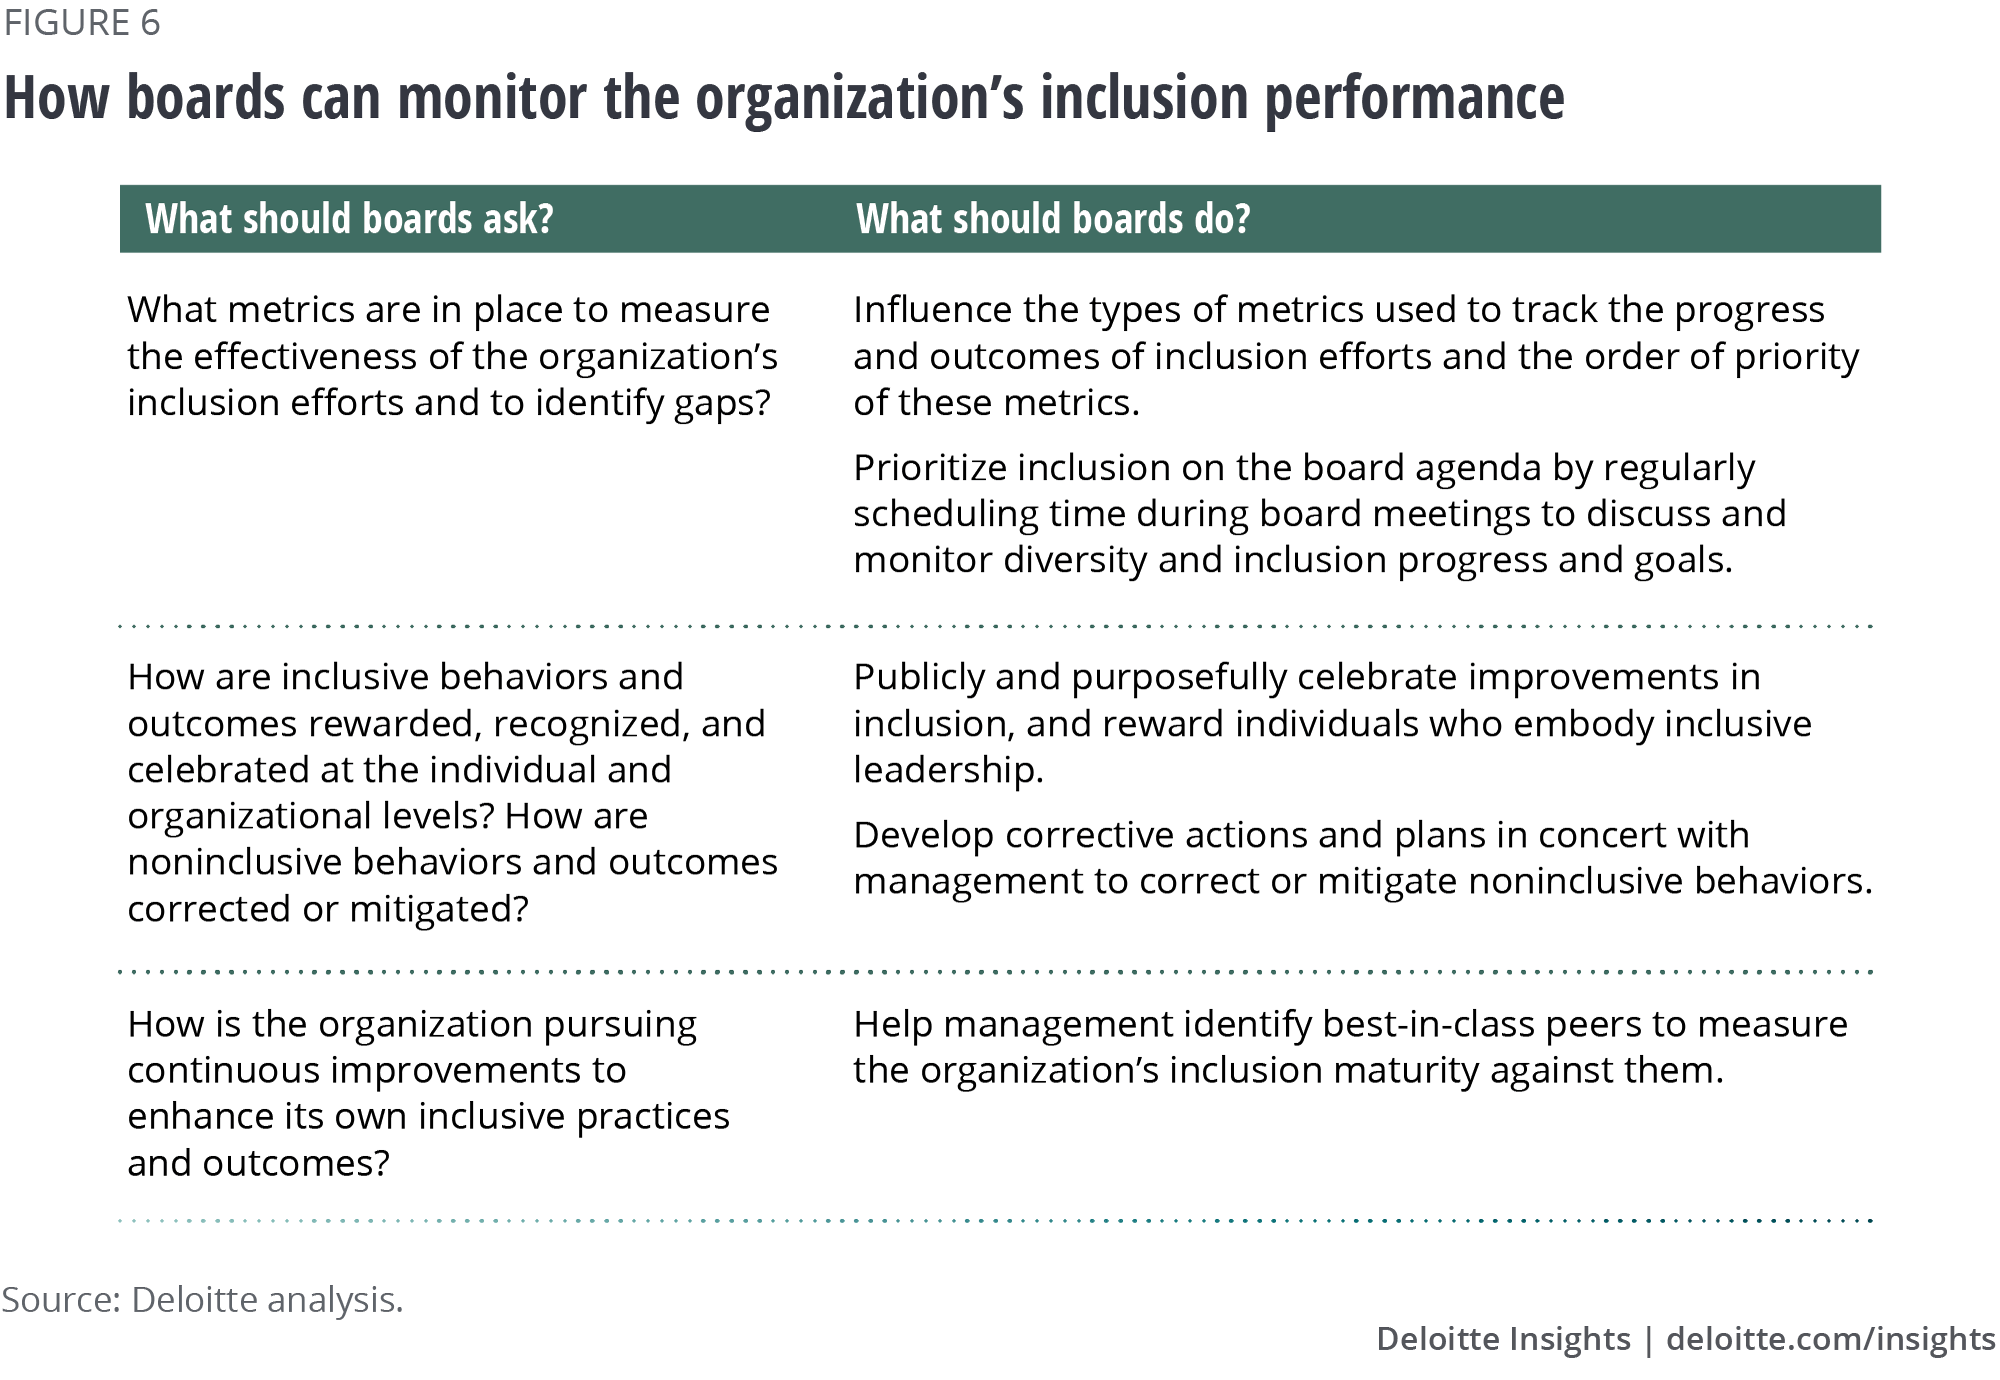 How boards can monitor the organization’s inclusion performance